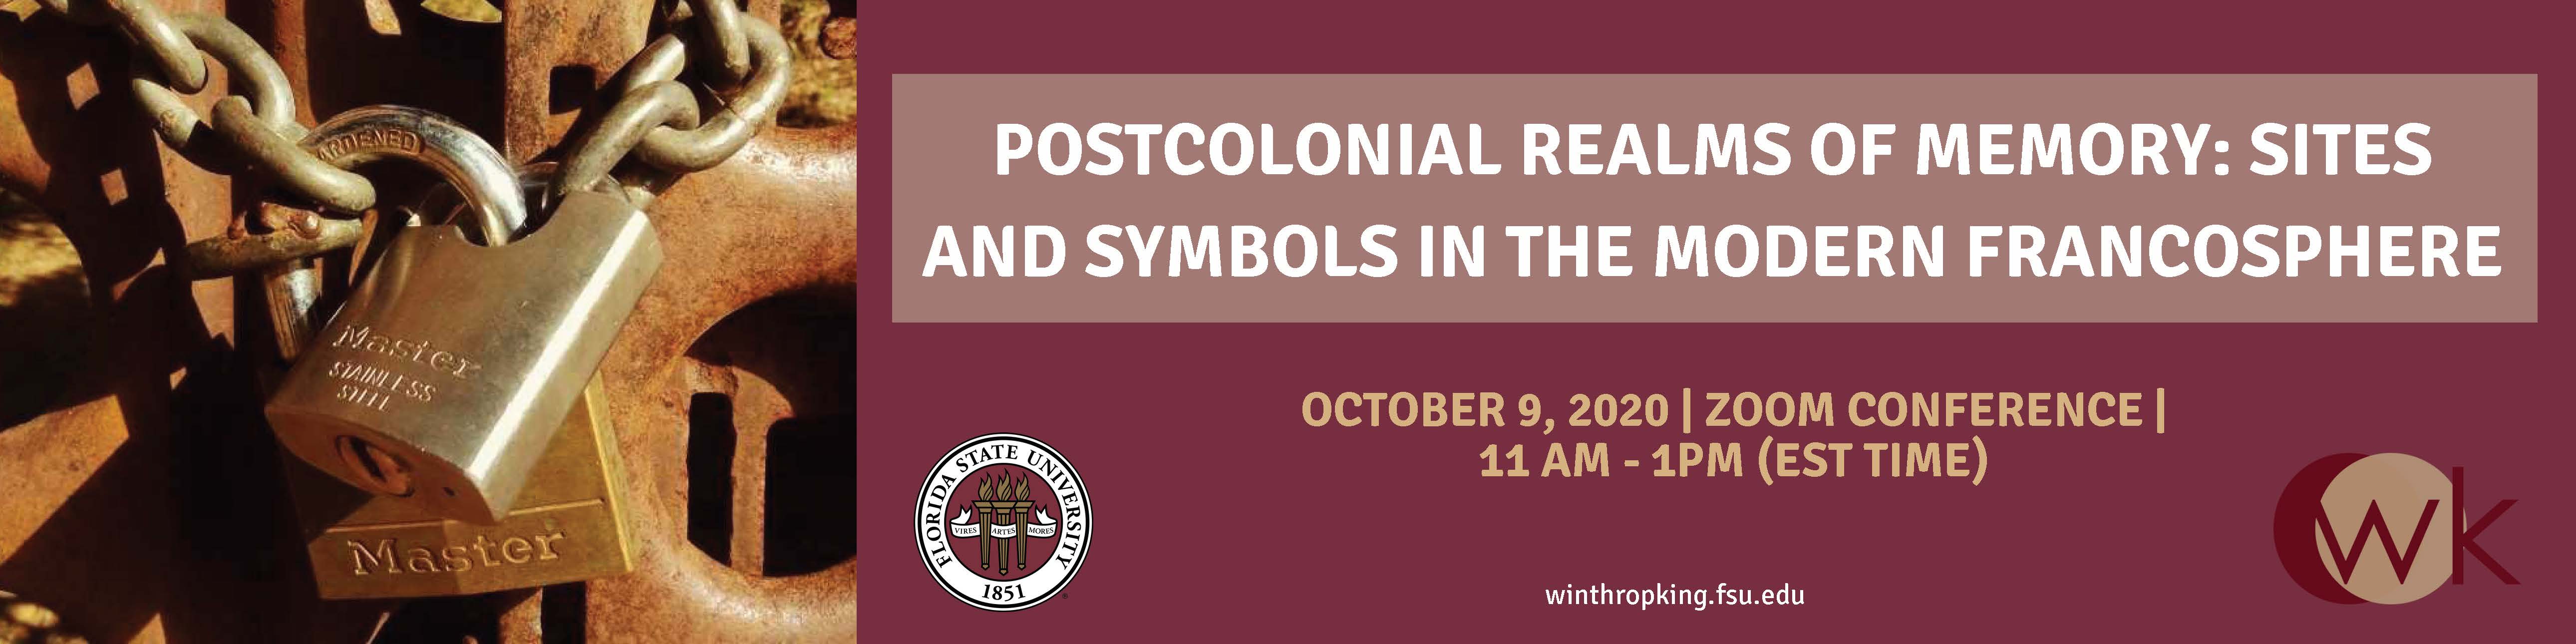 Postcolonial Realms Of Memory  Zoom Roundtable